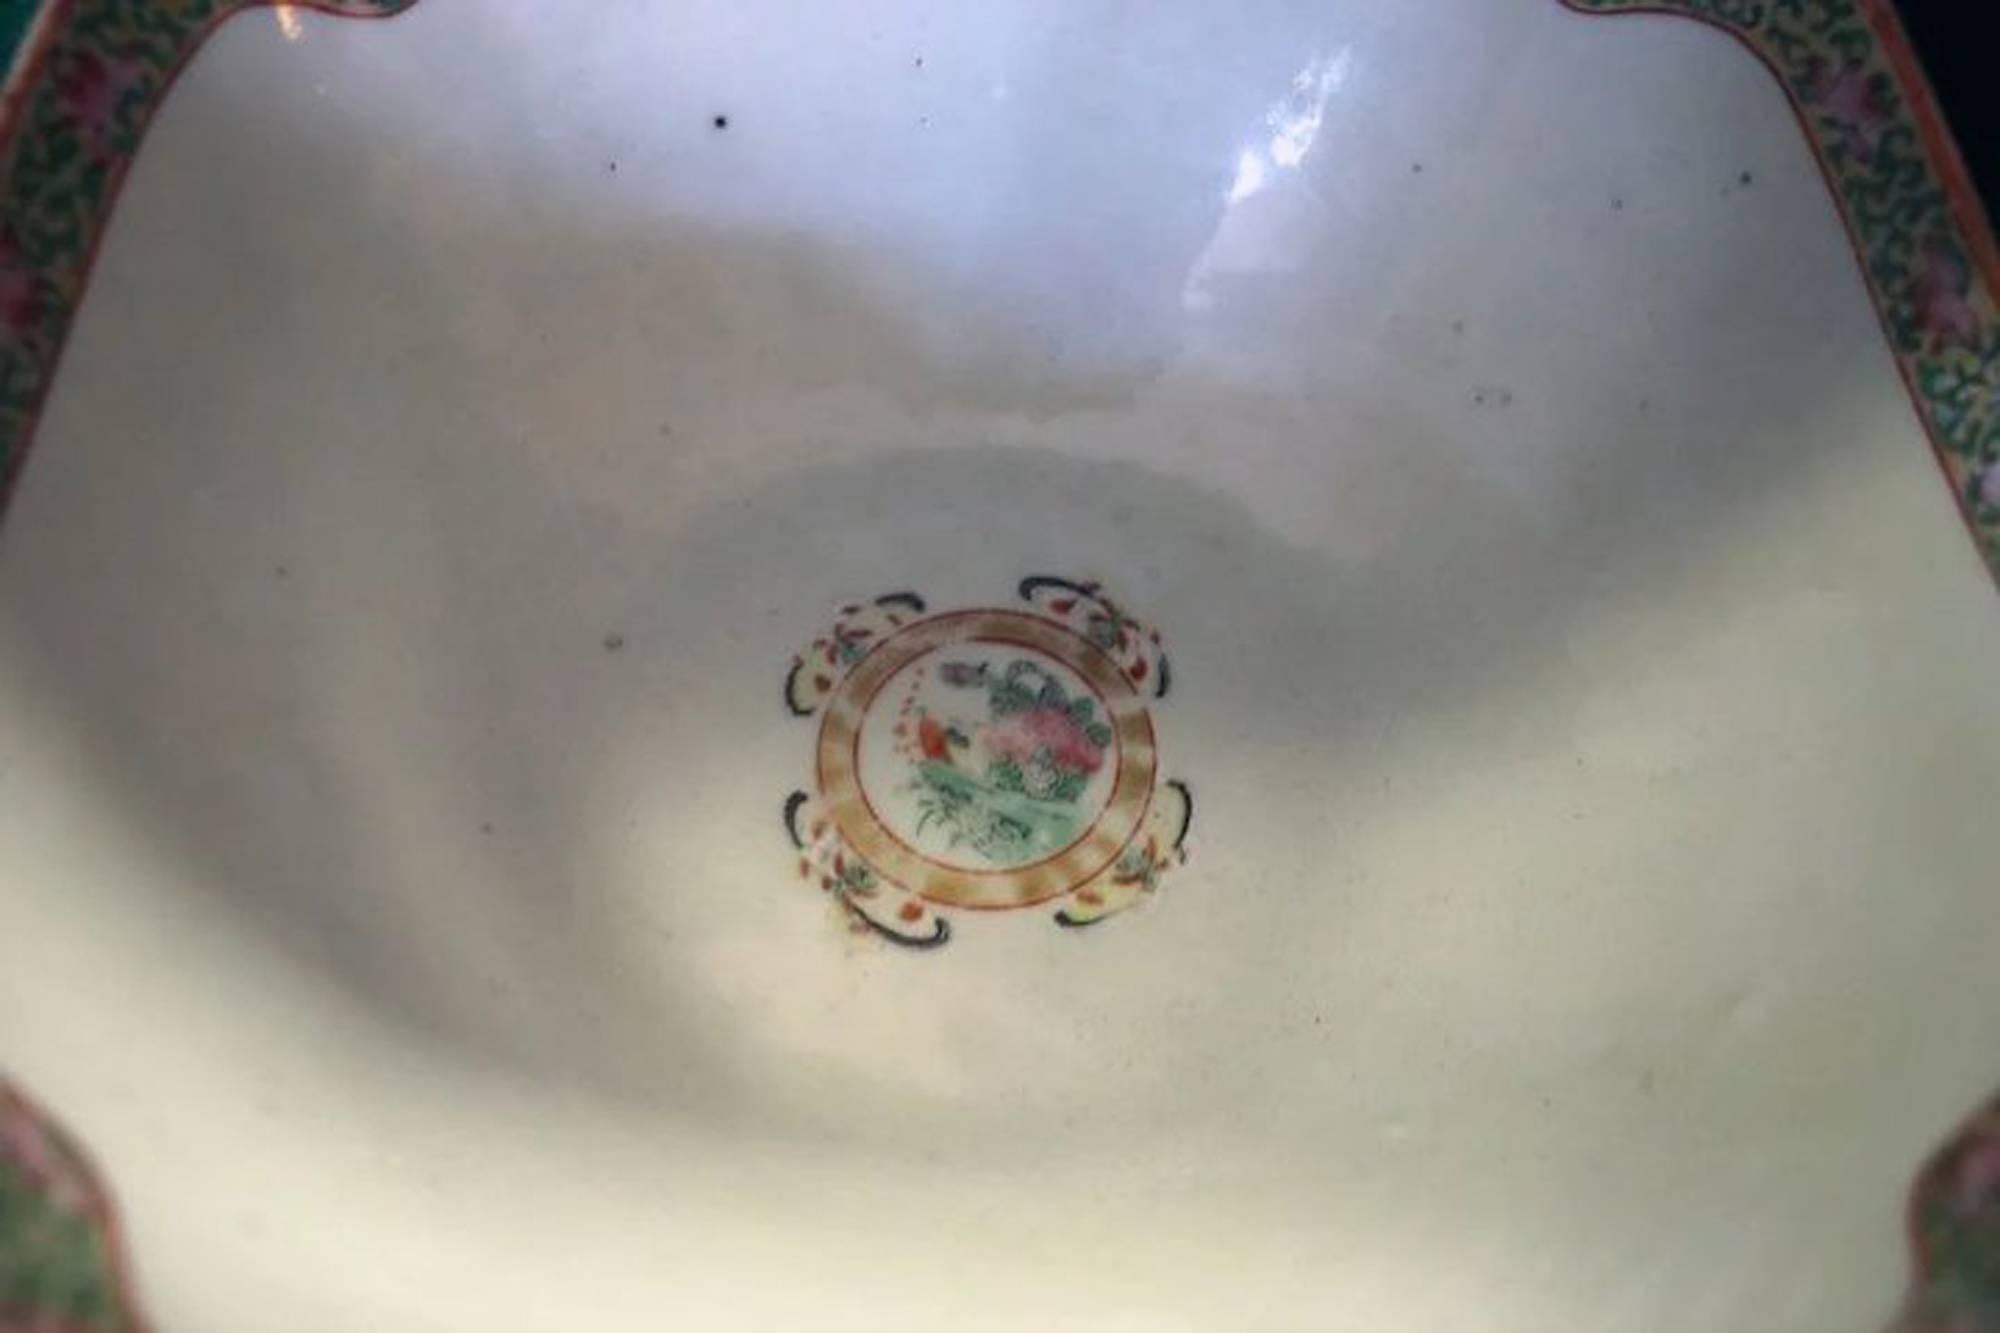 Chinese Export rose medallion serving bowl features unusual scalloped edges in four parts with beautiful birds, butterflies, fruit and floral decoration. Lovely detail. See measurements below.